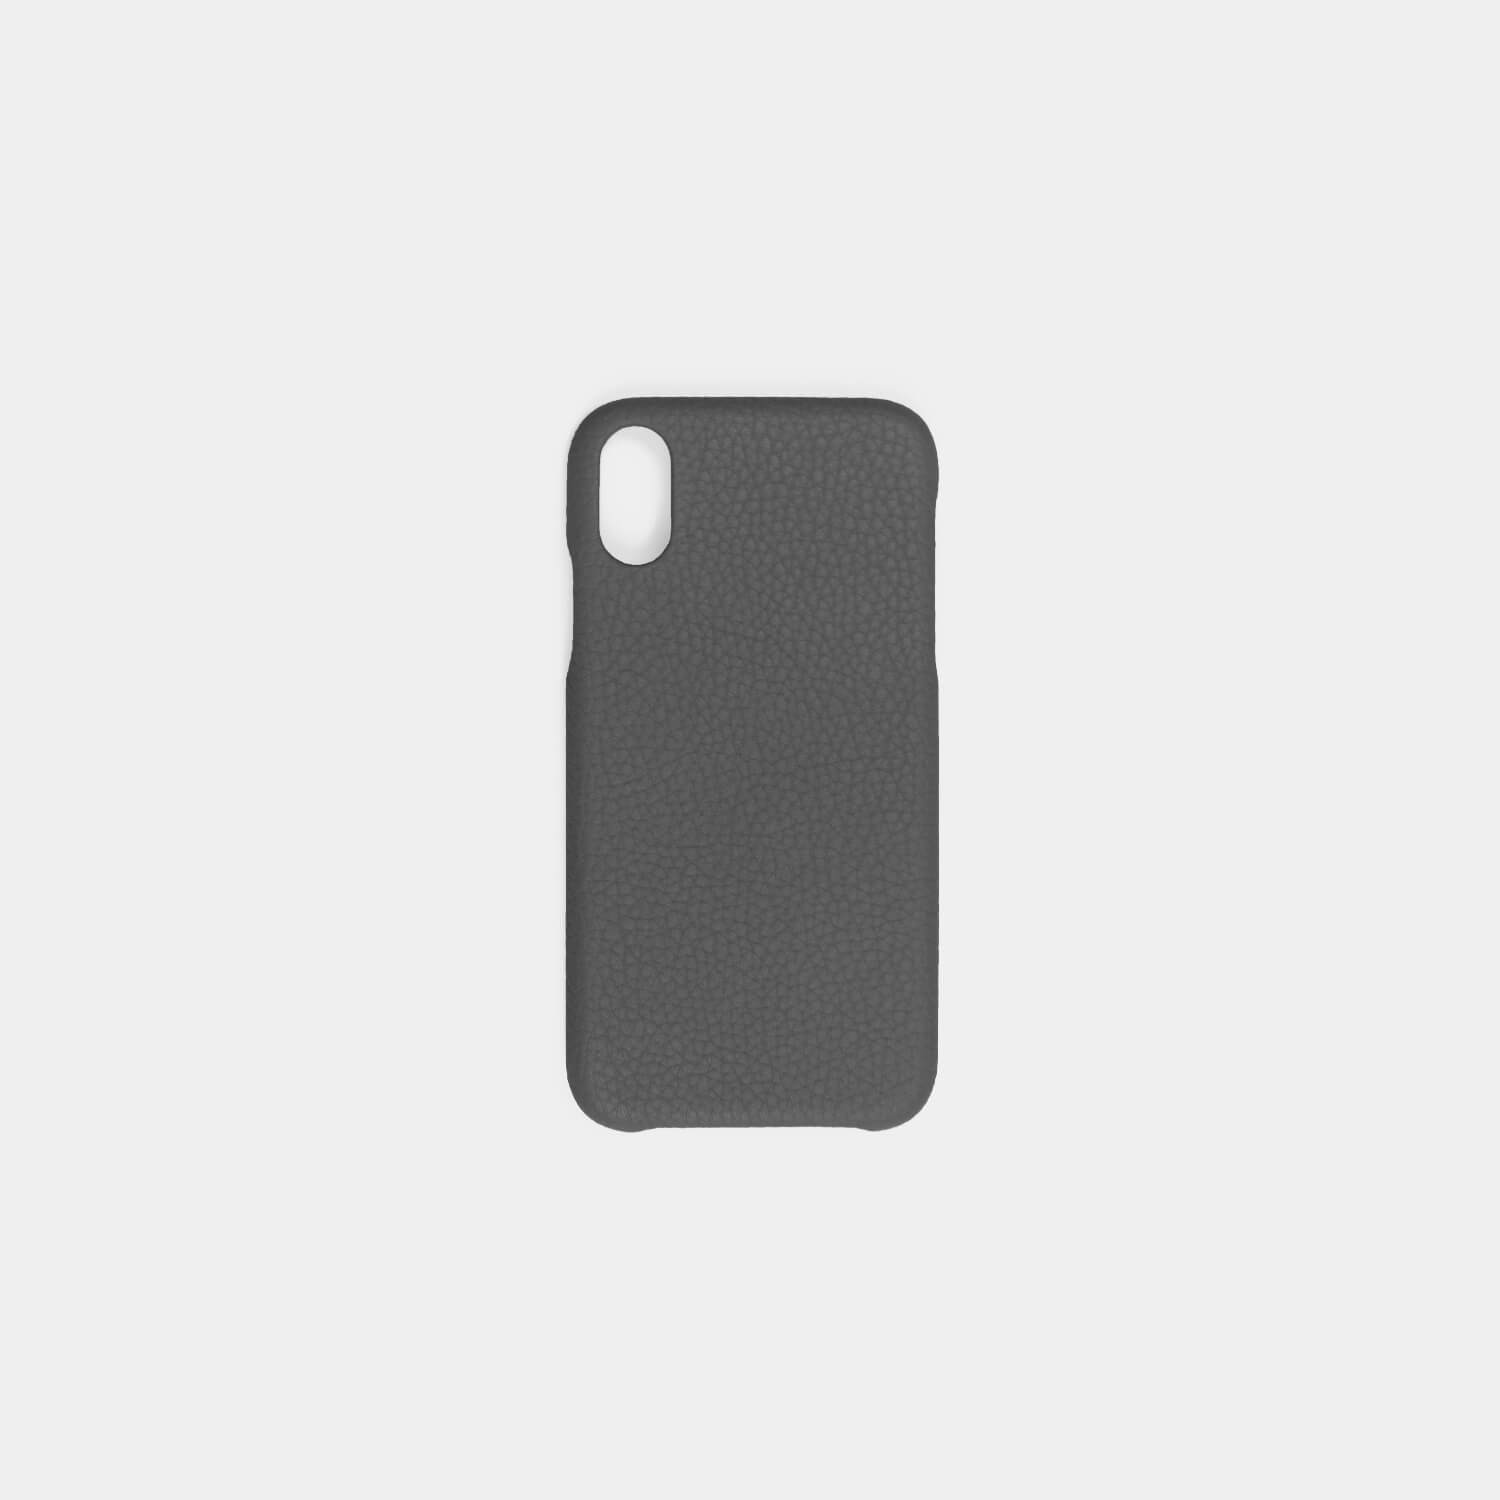 Pebble grain leather Samsung case for all models, moulds to the case to protect the phone